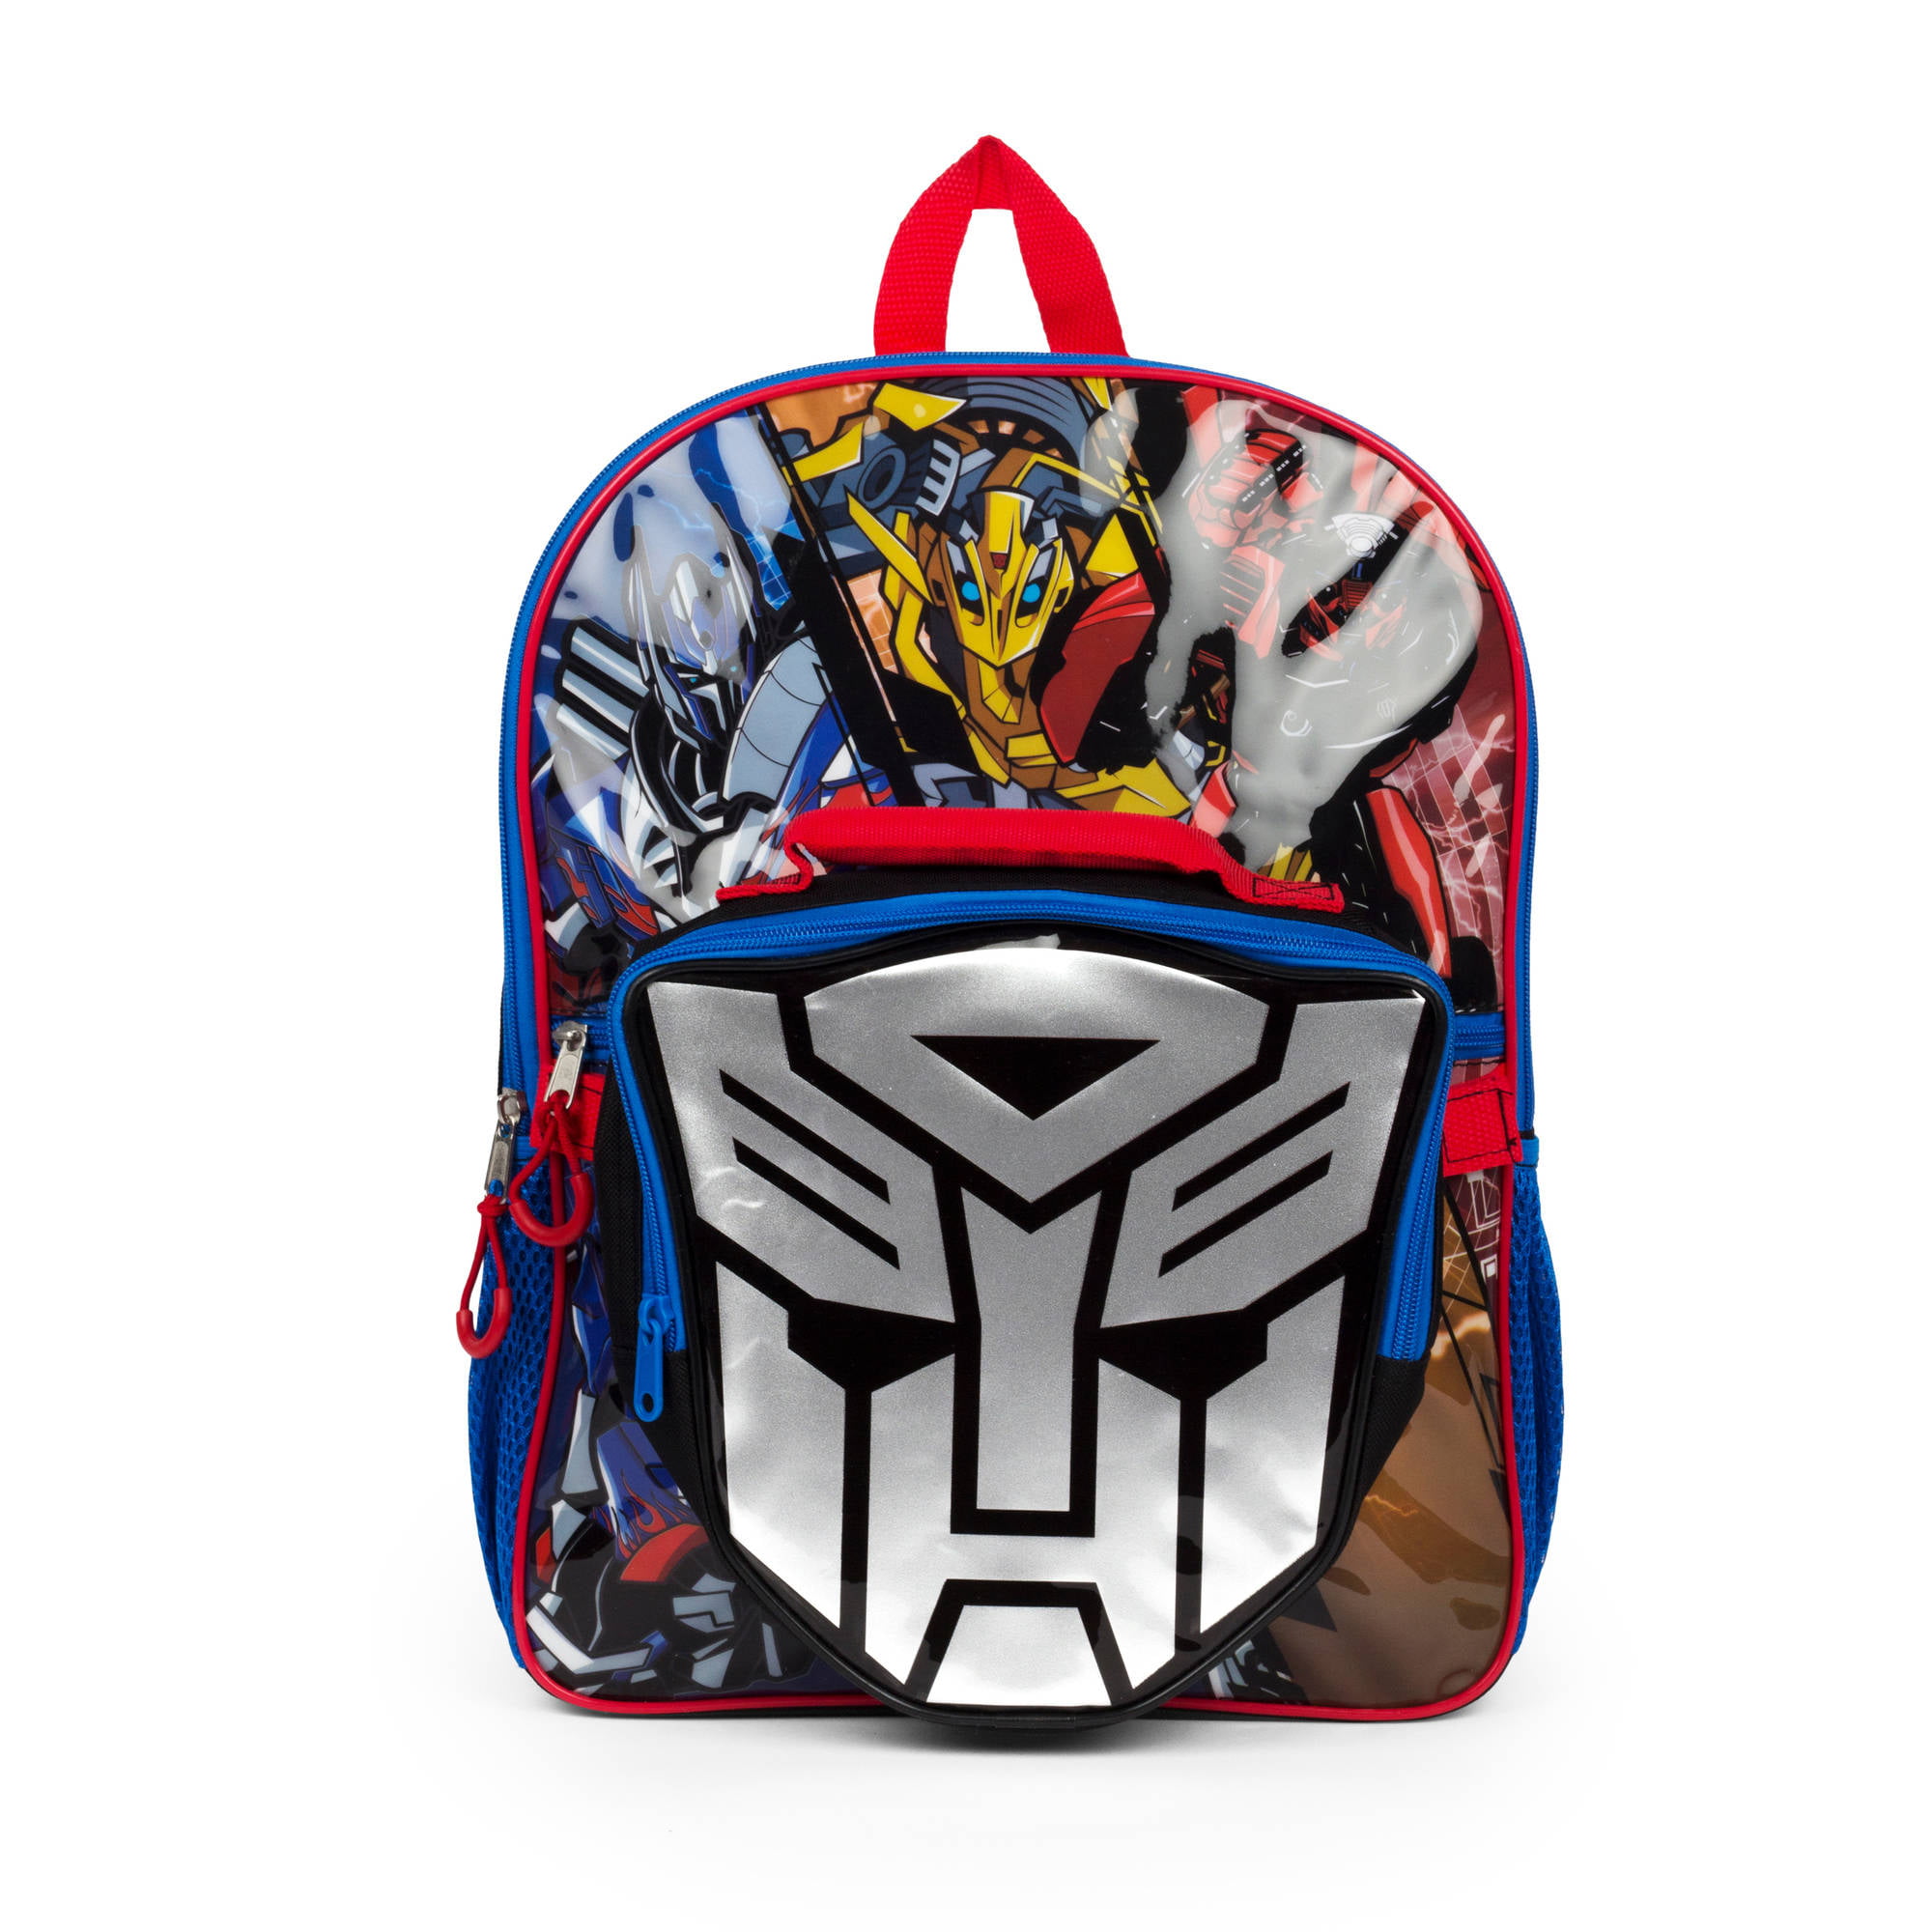 Screen Legends Transformers Backpack and Lunch Box Set for Boys